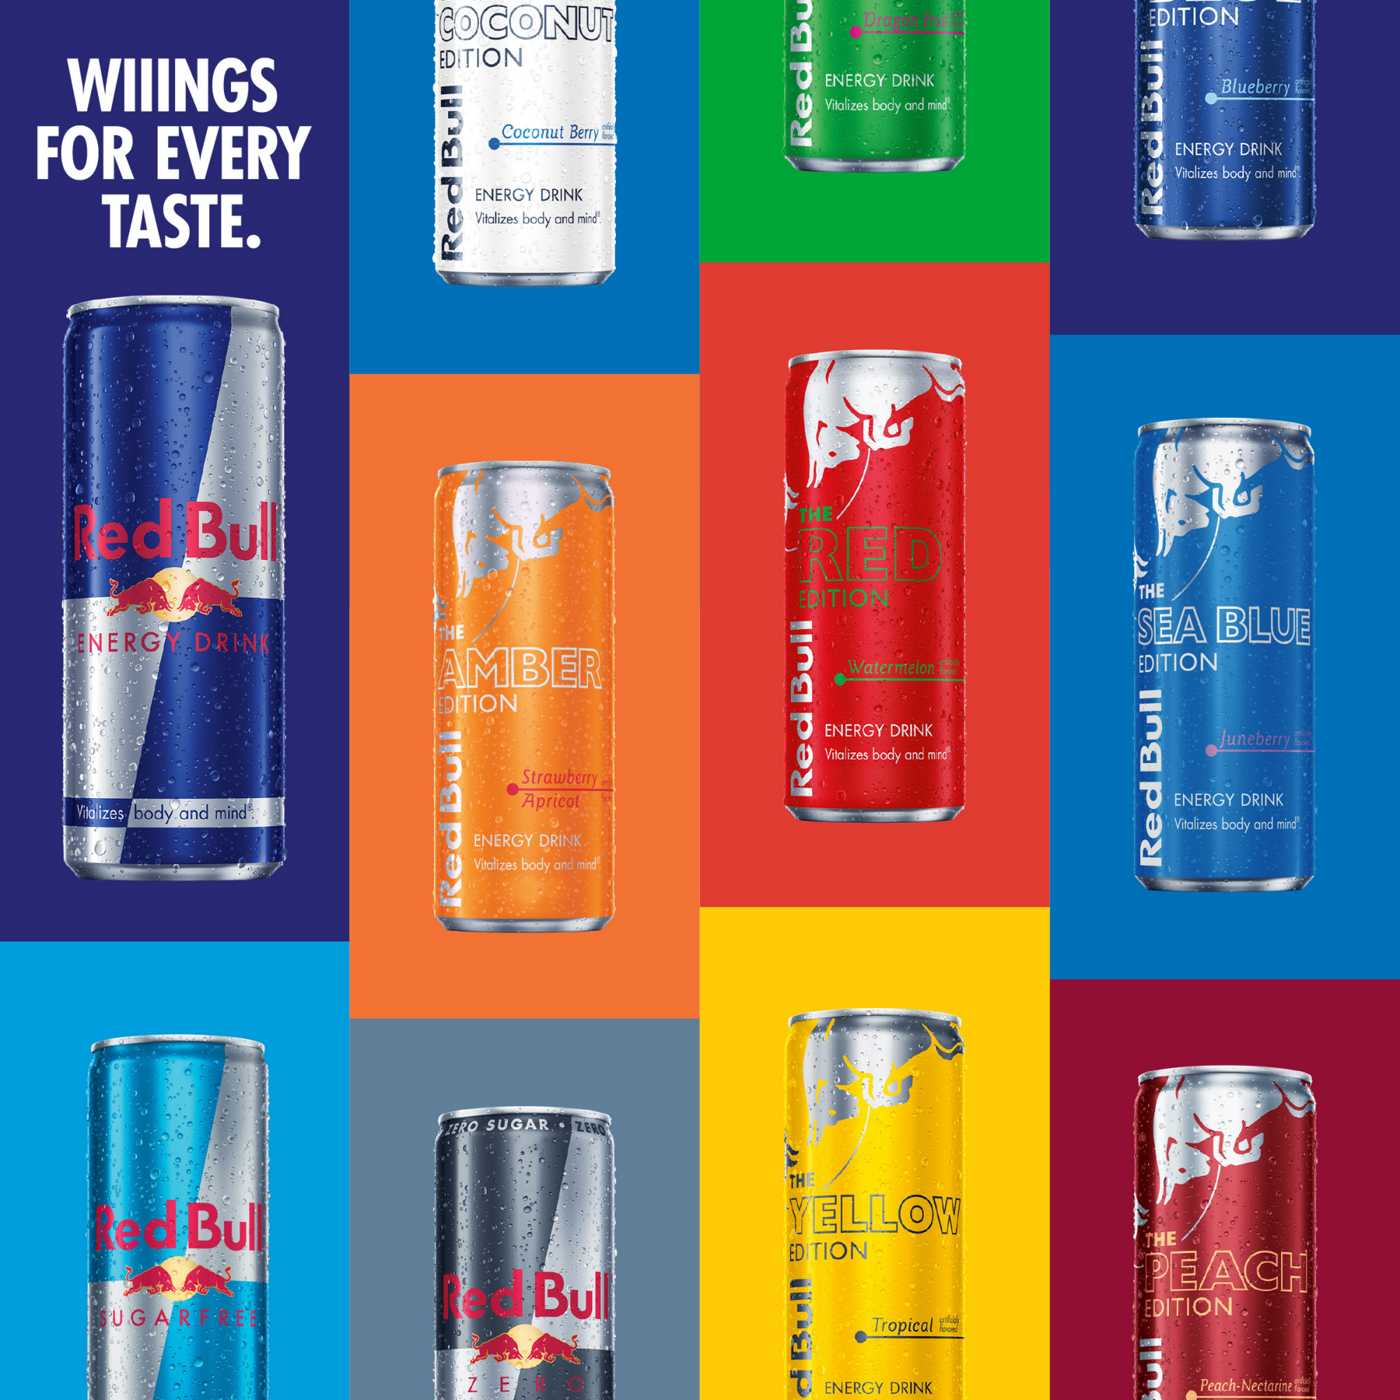 Red Bull Sea Blue Edition Juneberry Energy Drink; image 8 of 10